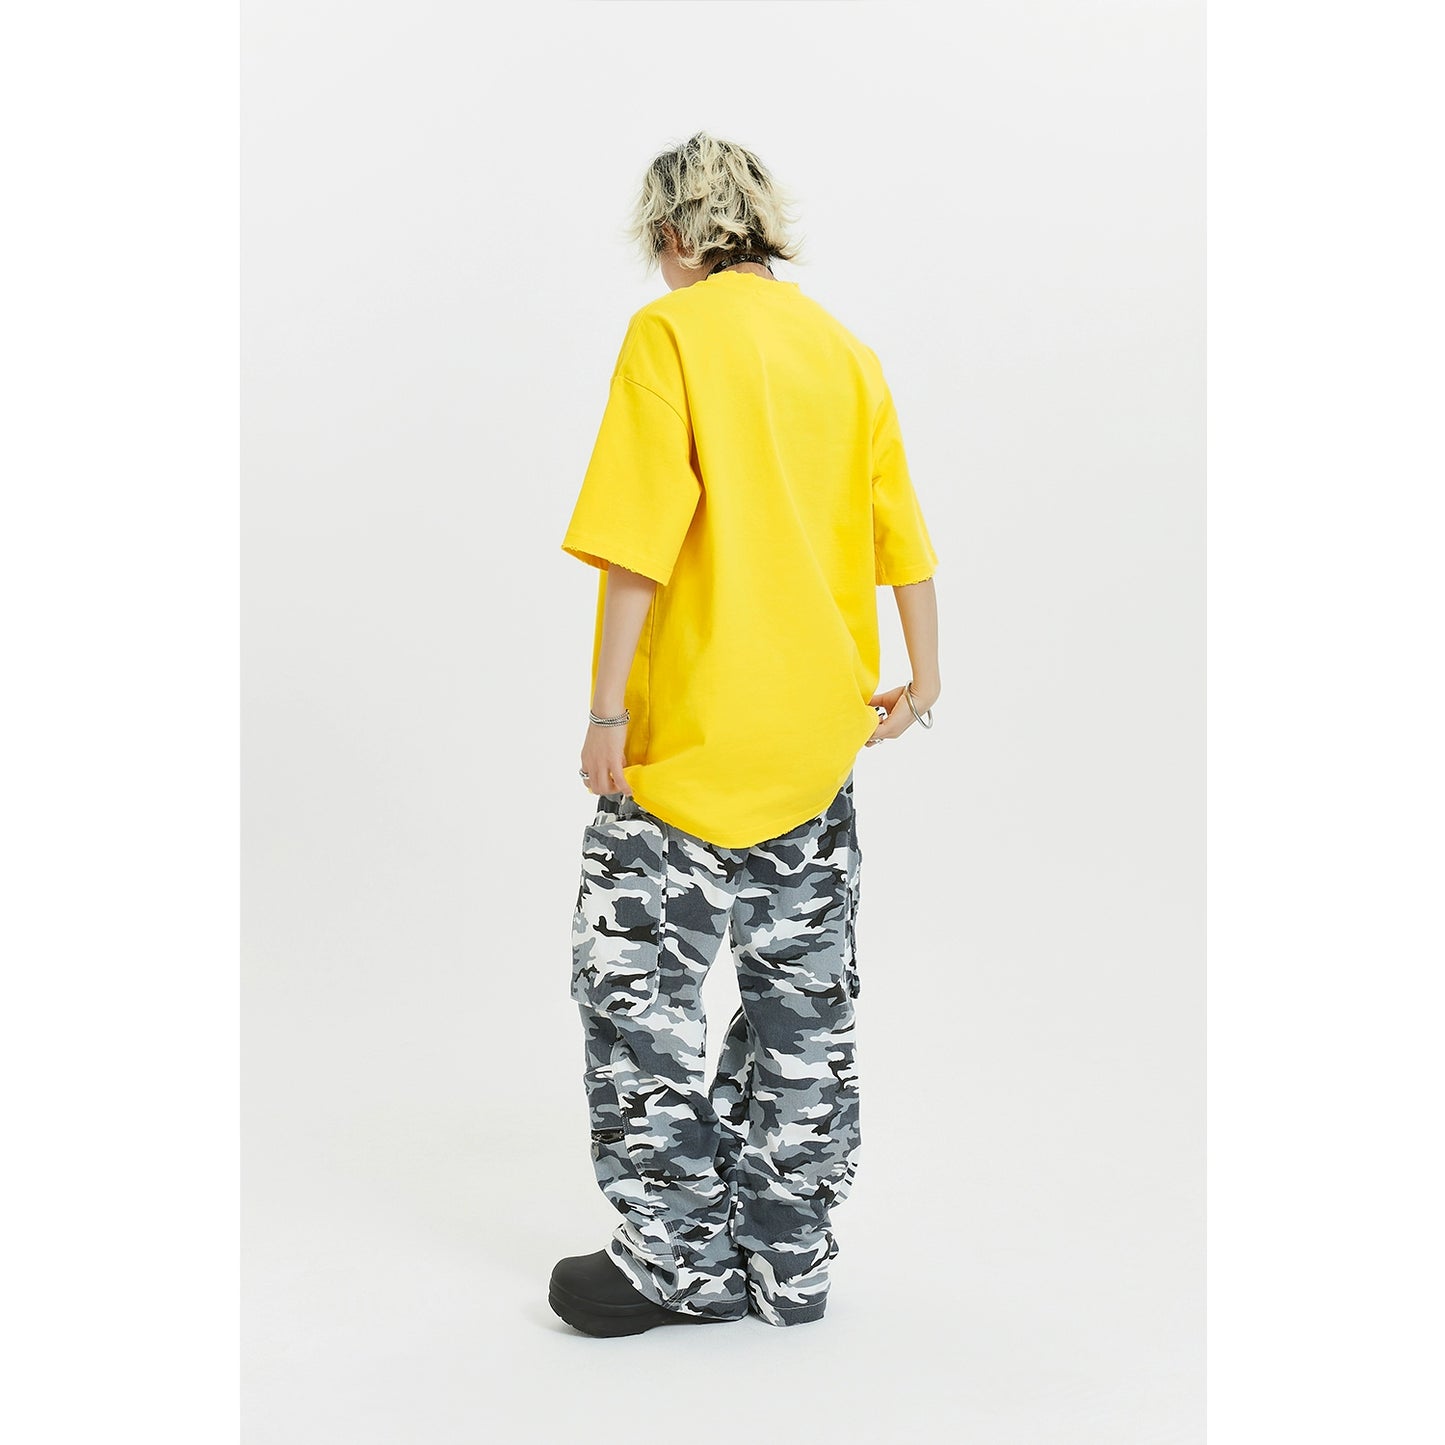 MICHINNYON American retro hiphop cargo camouflage function three-dimensional multi-pocket baggy trousers